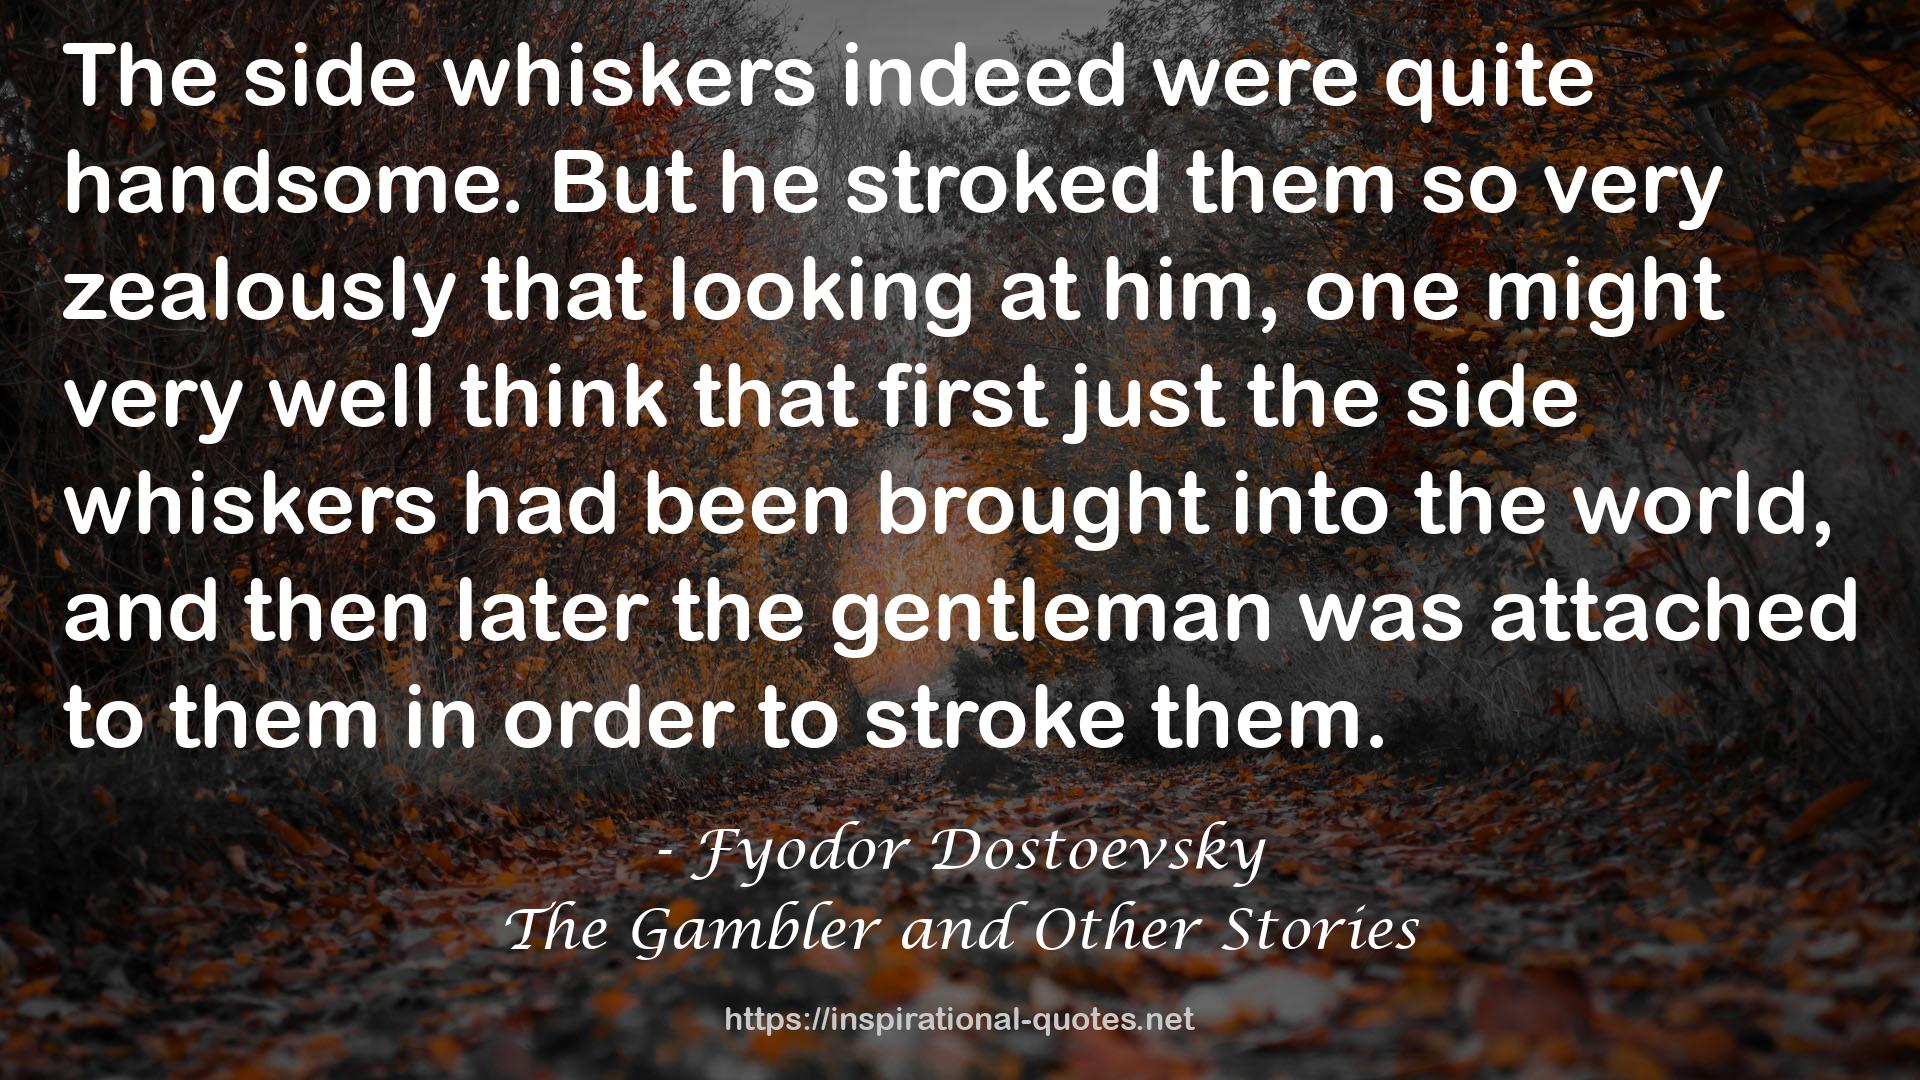 The Gambler and Other Stories QUOTES